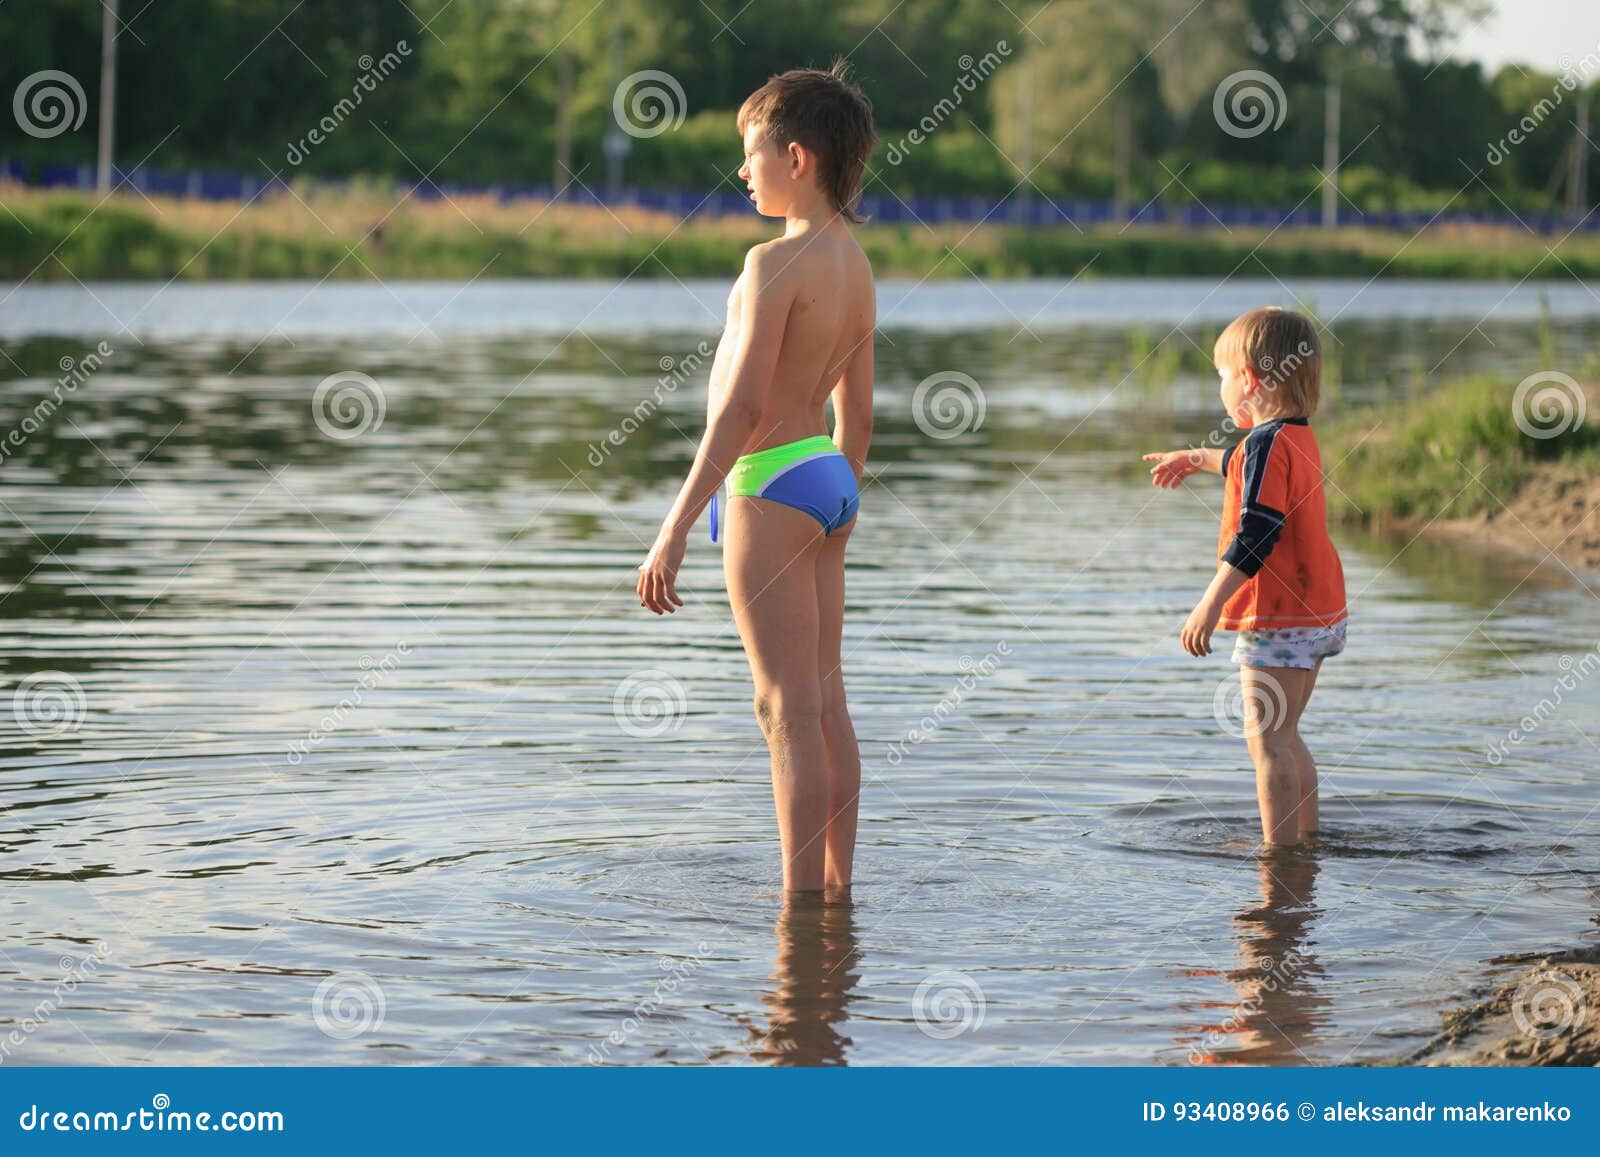 children bathe in the evening on the city beach